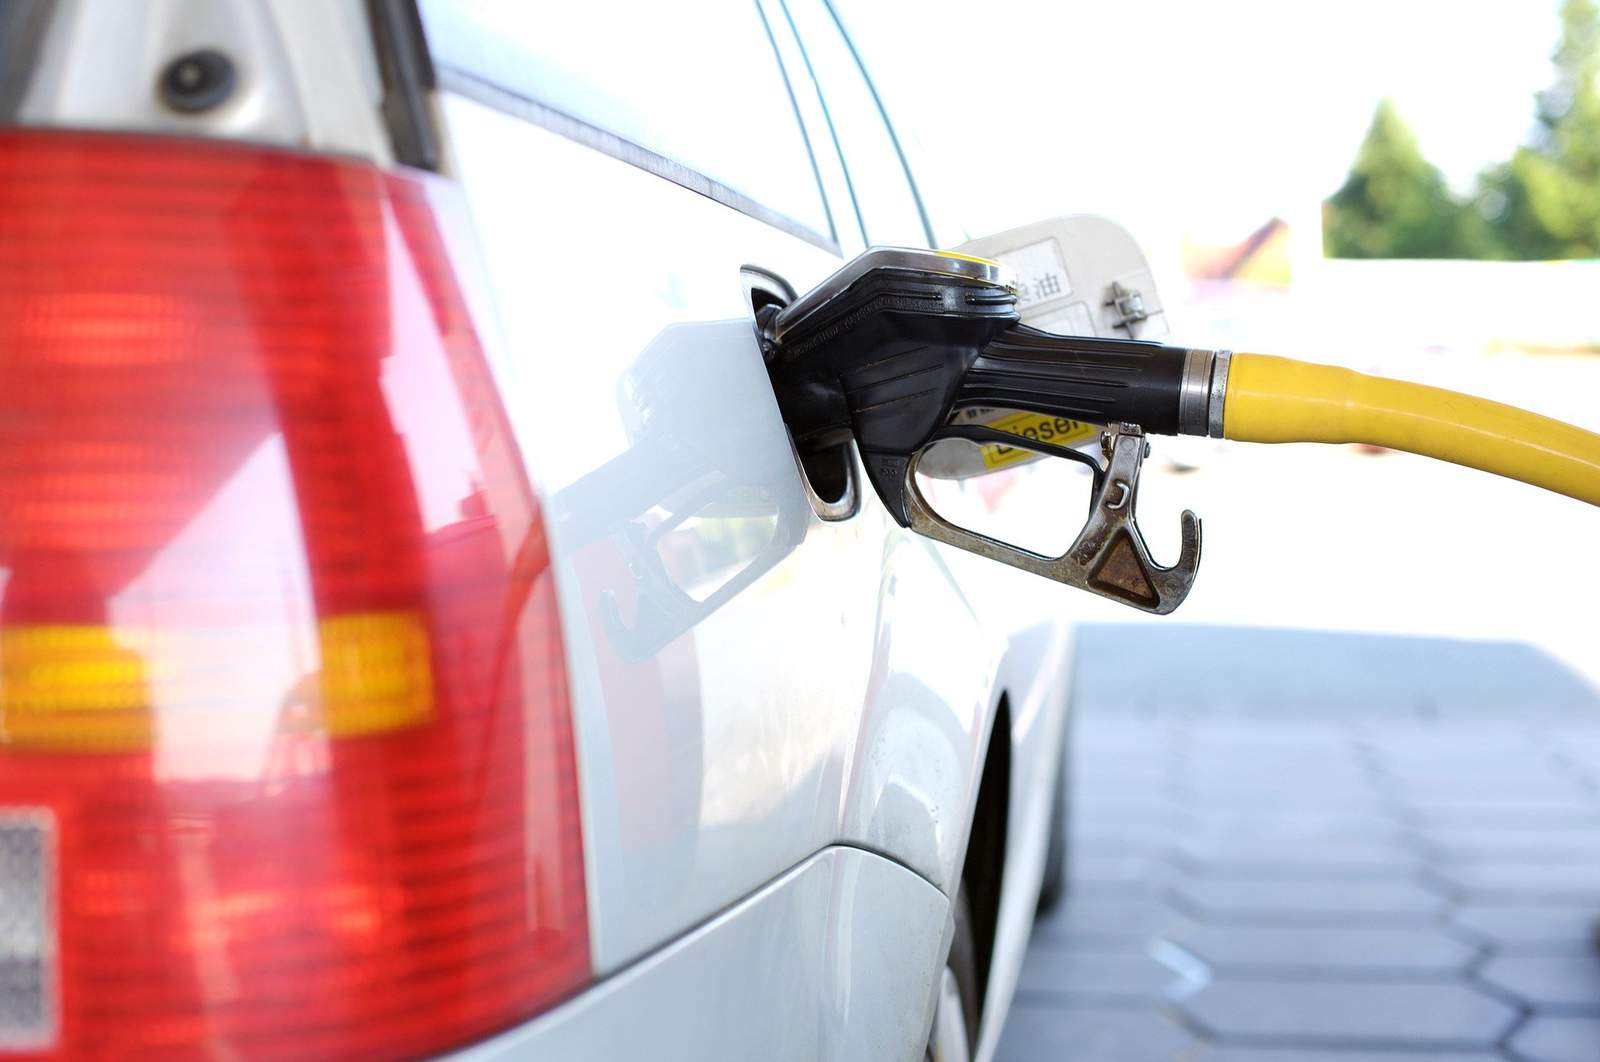 Florida gas prices surge to highest mark since May 2019